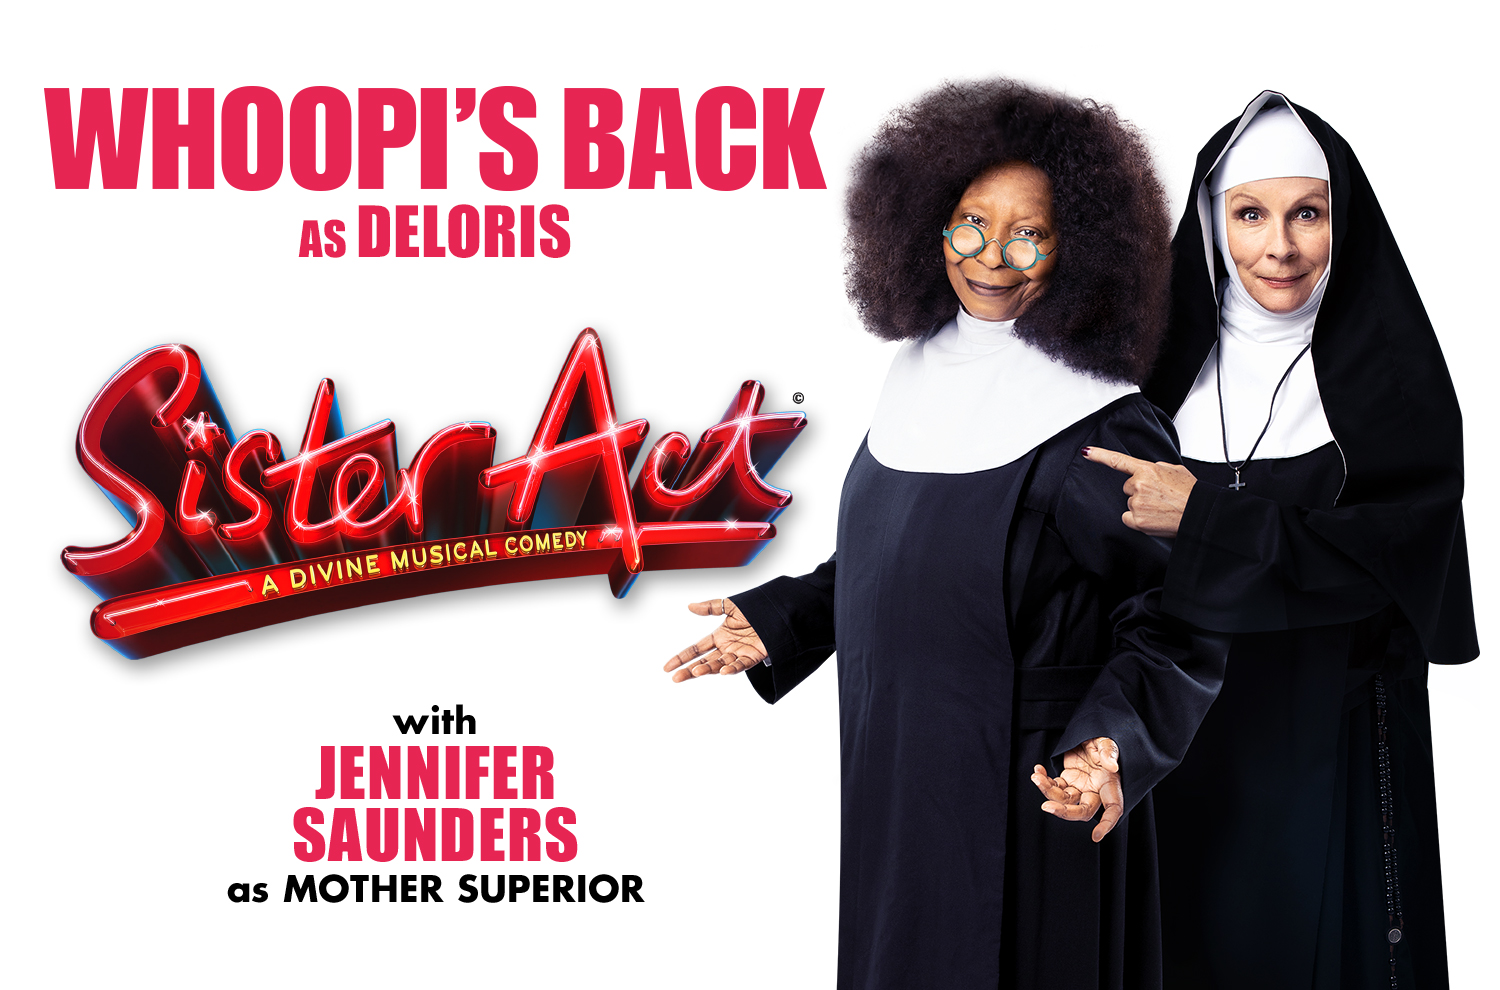 SISTER ACT: THE MUSICAL - The Golden Ticket Club